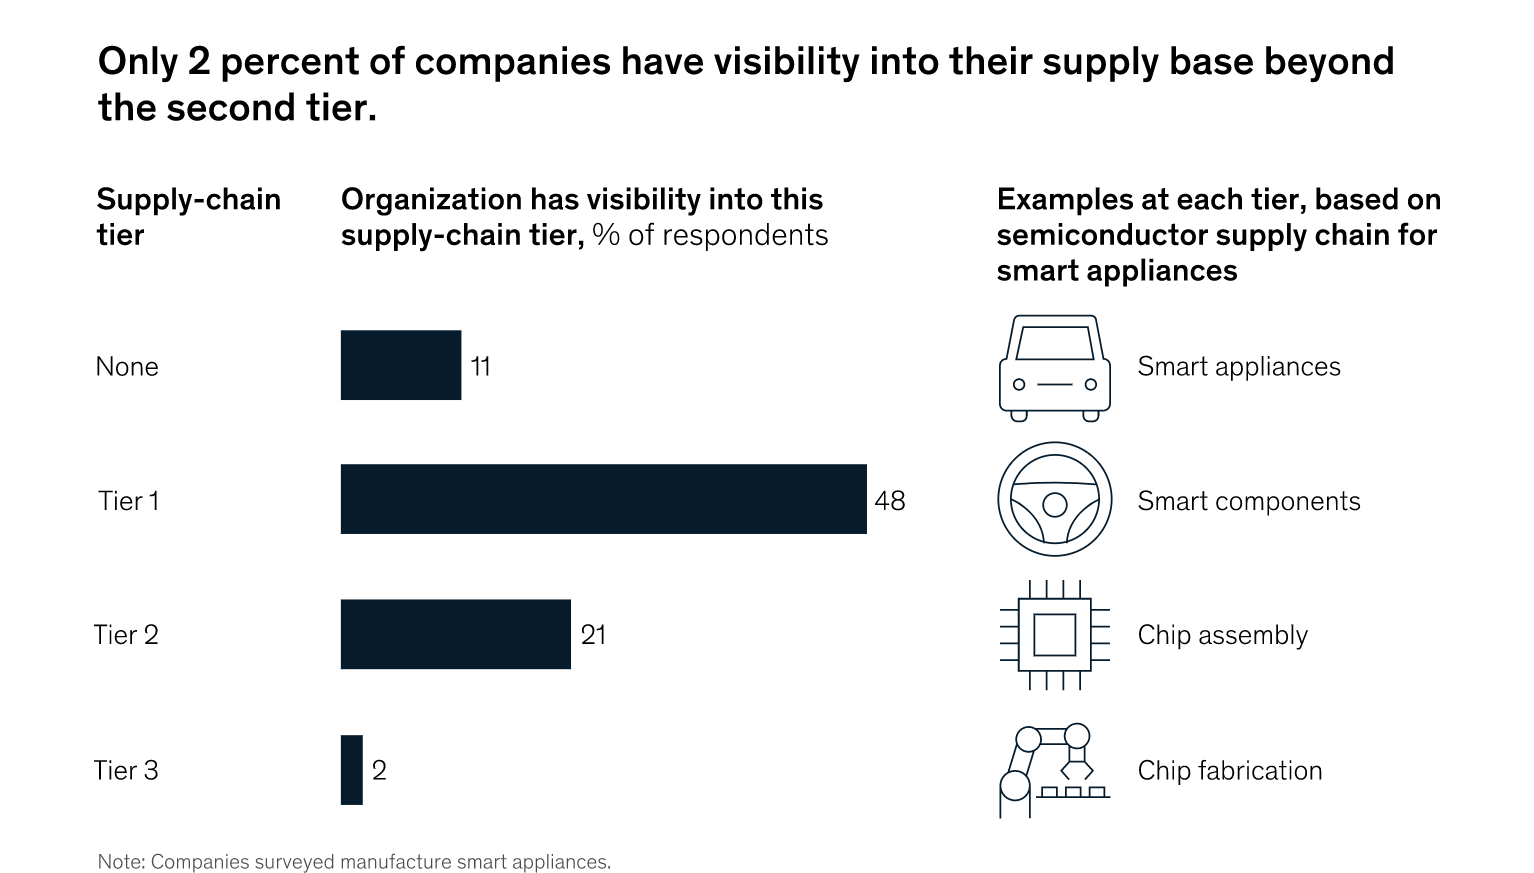 The survey results are presented in a graph showing that only 2 percent of companies have visibility beyond Tier 2 making supply chain data sharing more important.